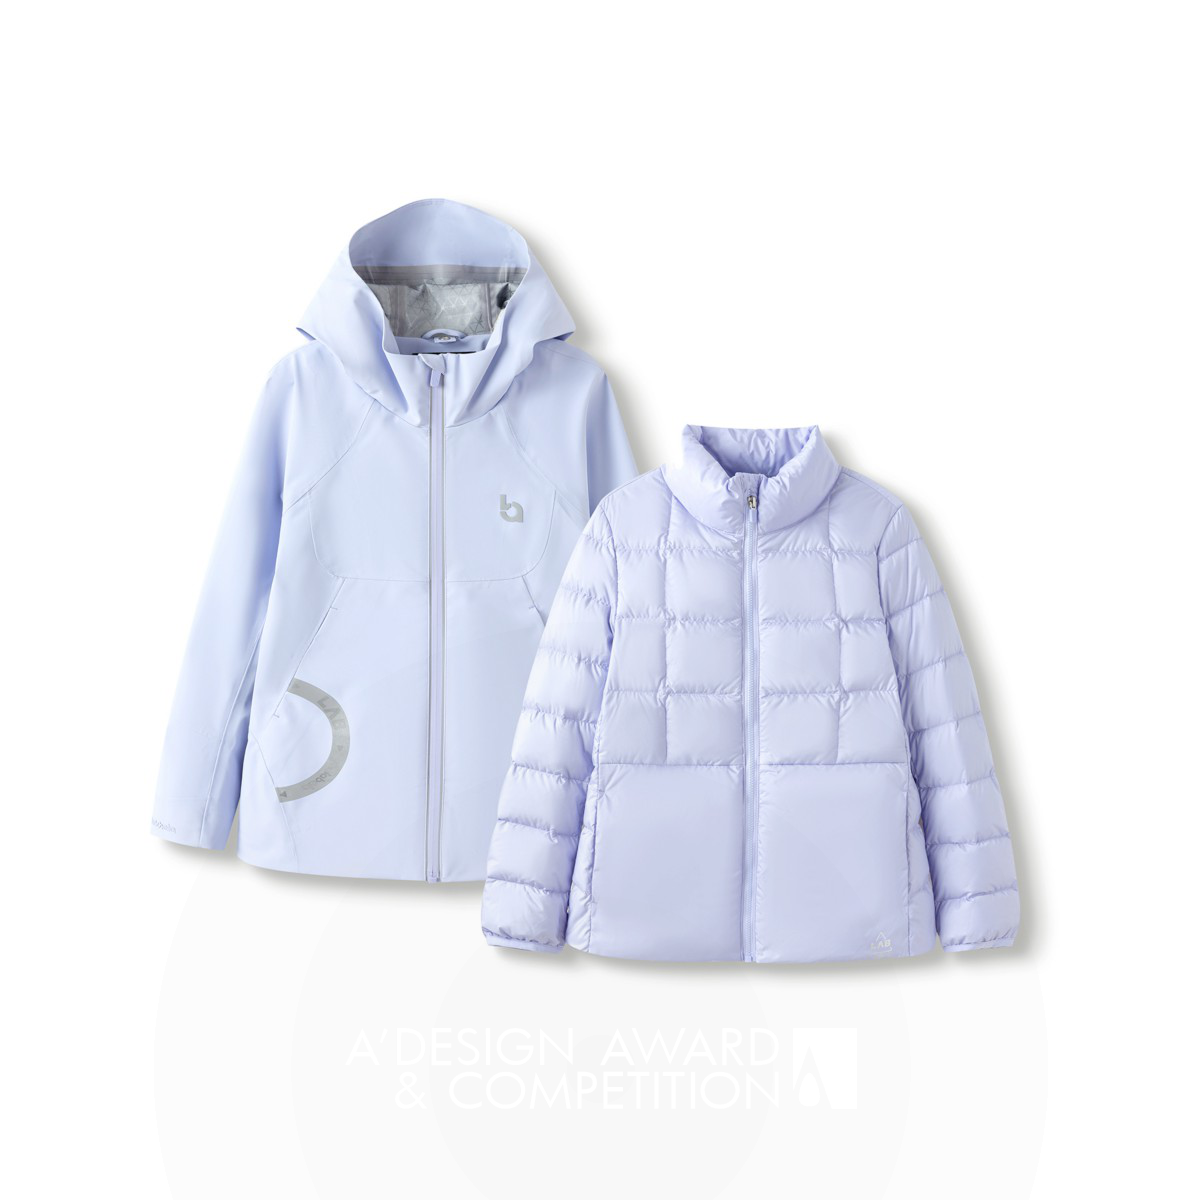 ZHE JIANG SEMIR GARMENT CO.,LTD. wins Bronze at the prestigious A' Baby, Kids and Children's Products Design Award with Growing Shell Down Jacket Kids' Clothing.